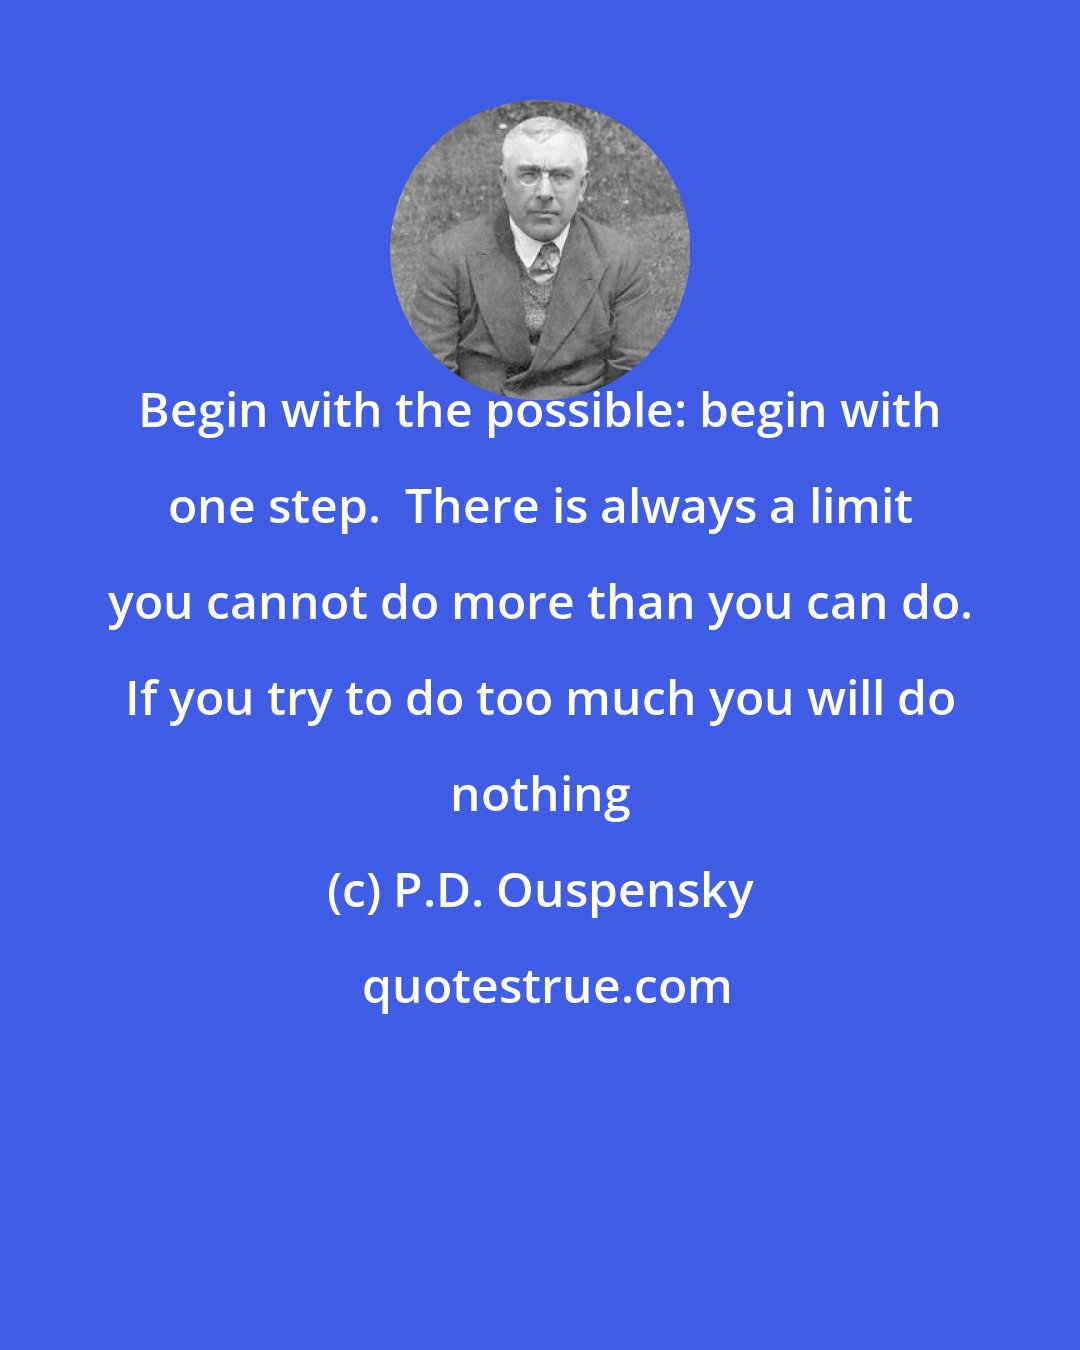 P.D. Ouspensky: Begin with the possible: begin with one step.  There is always a limit you cannot do more than you can do. If you try to do too much you will do nothing